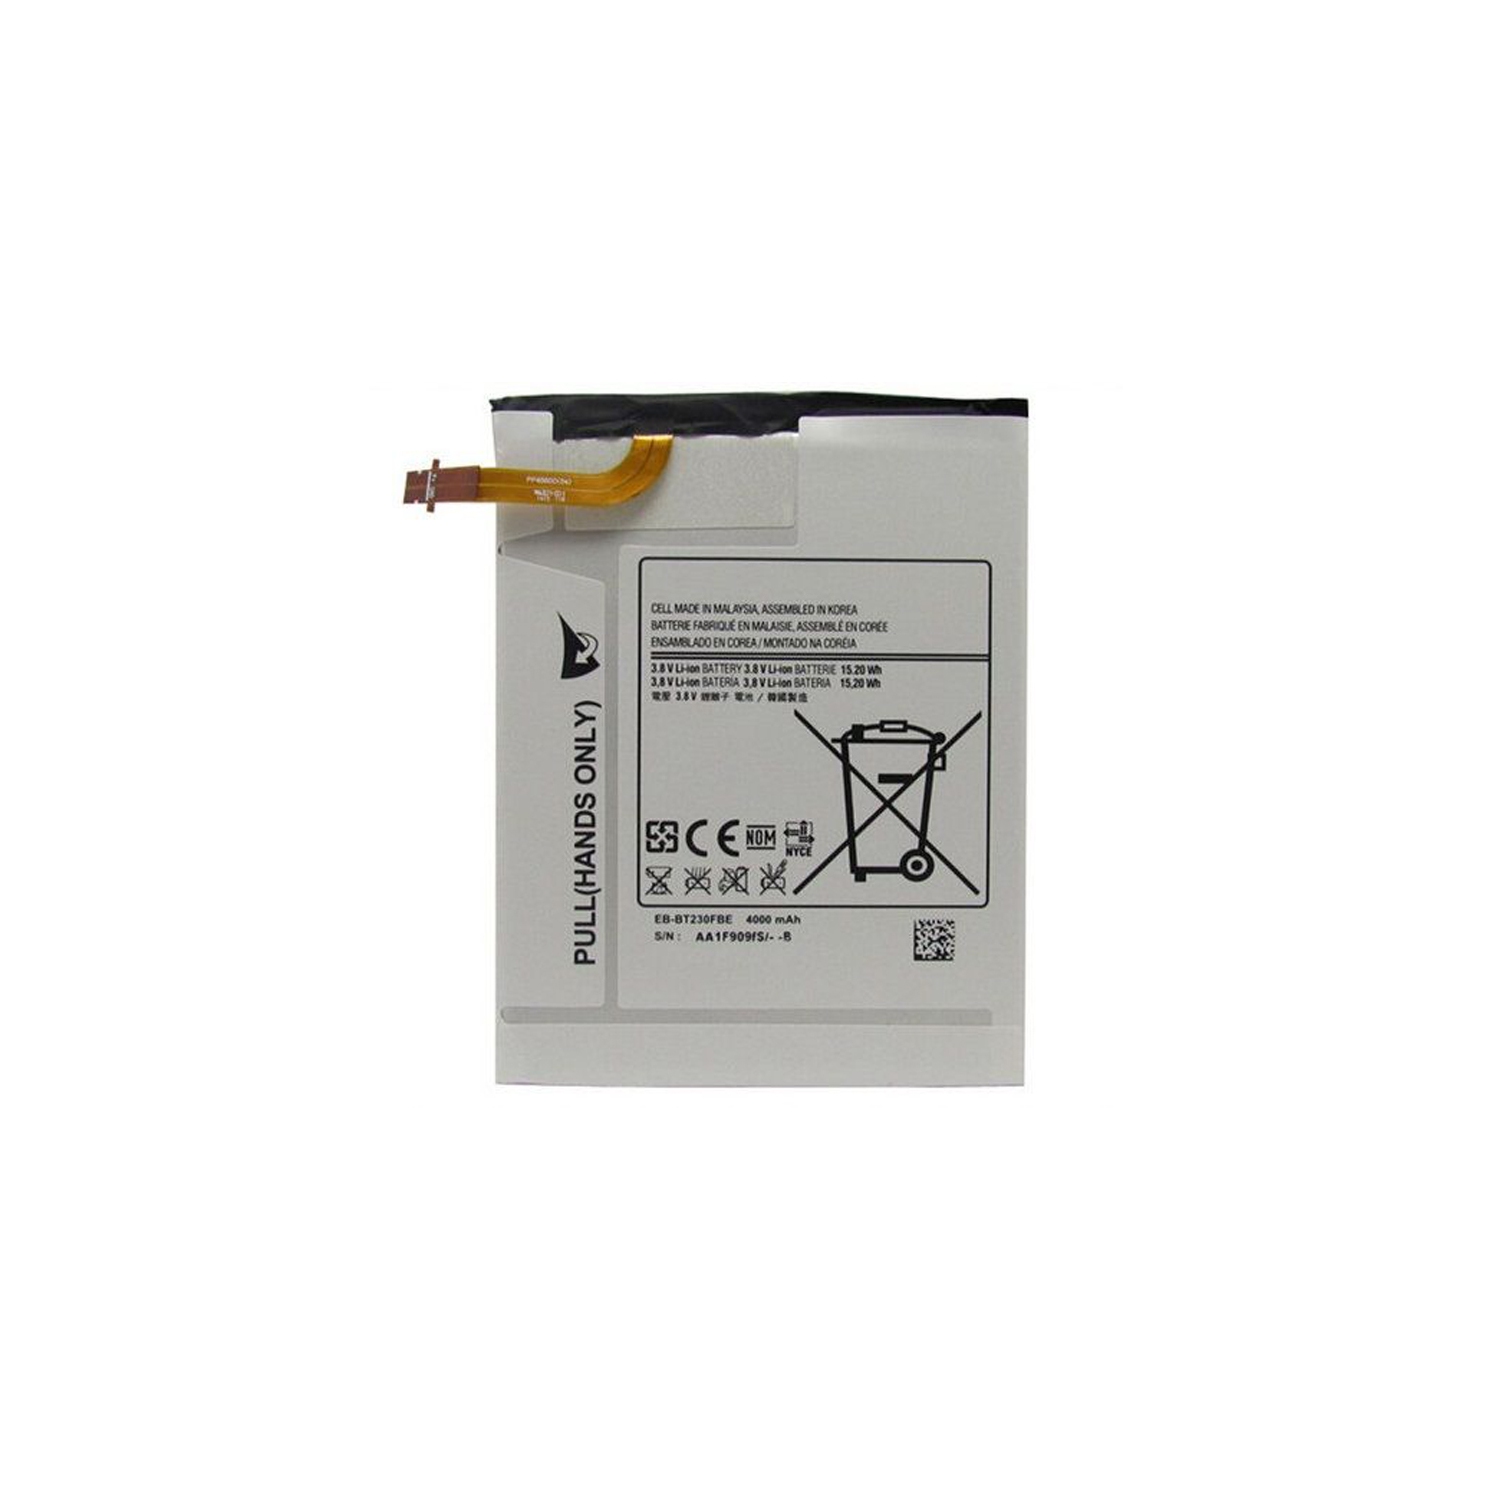 Samsung Galaxy Tab 4 7.0 Replacement Battery BT230FBE SM-T230 SM-T235